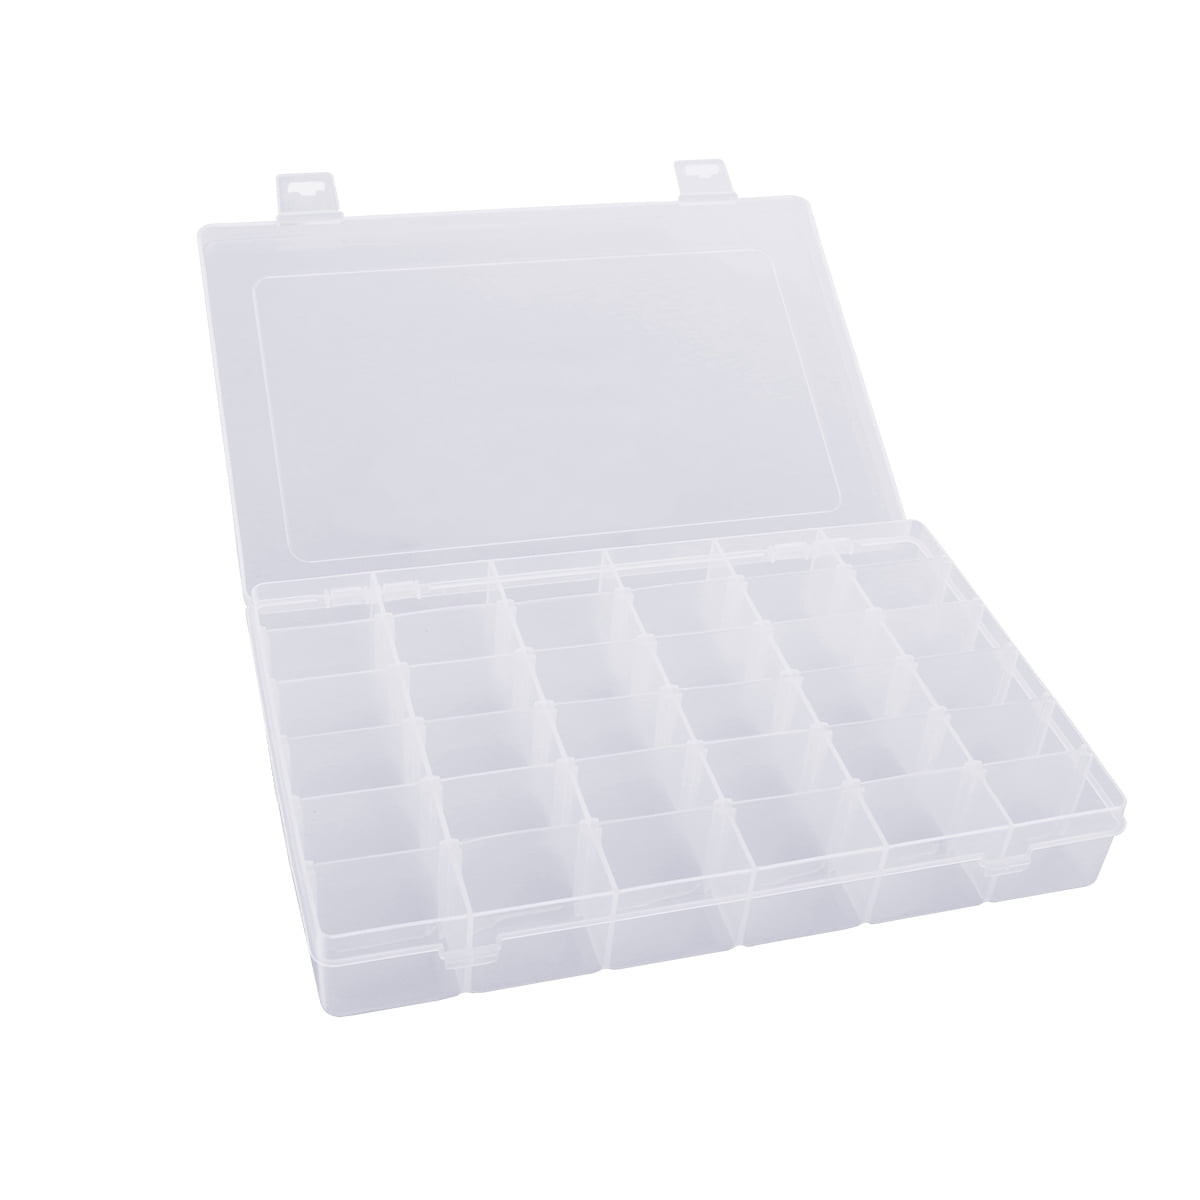 SOMELINE Storage Box Plastic Containers with Removable Dividers Organizer for Jewellery Earrings Accessories Small Compartments Case Holder Boxes 36 Grids 